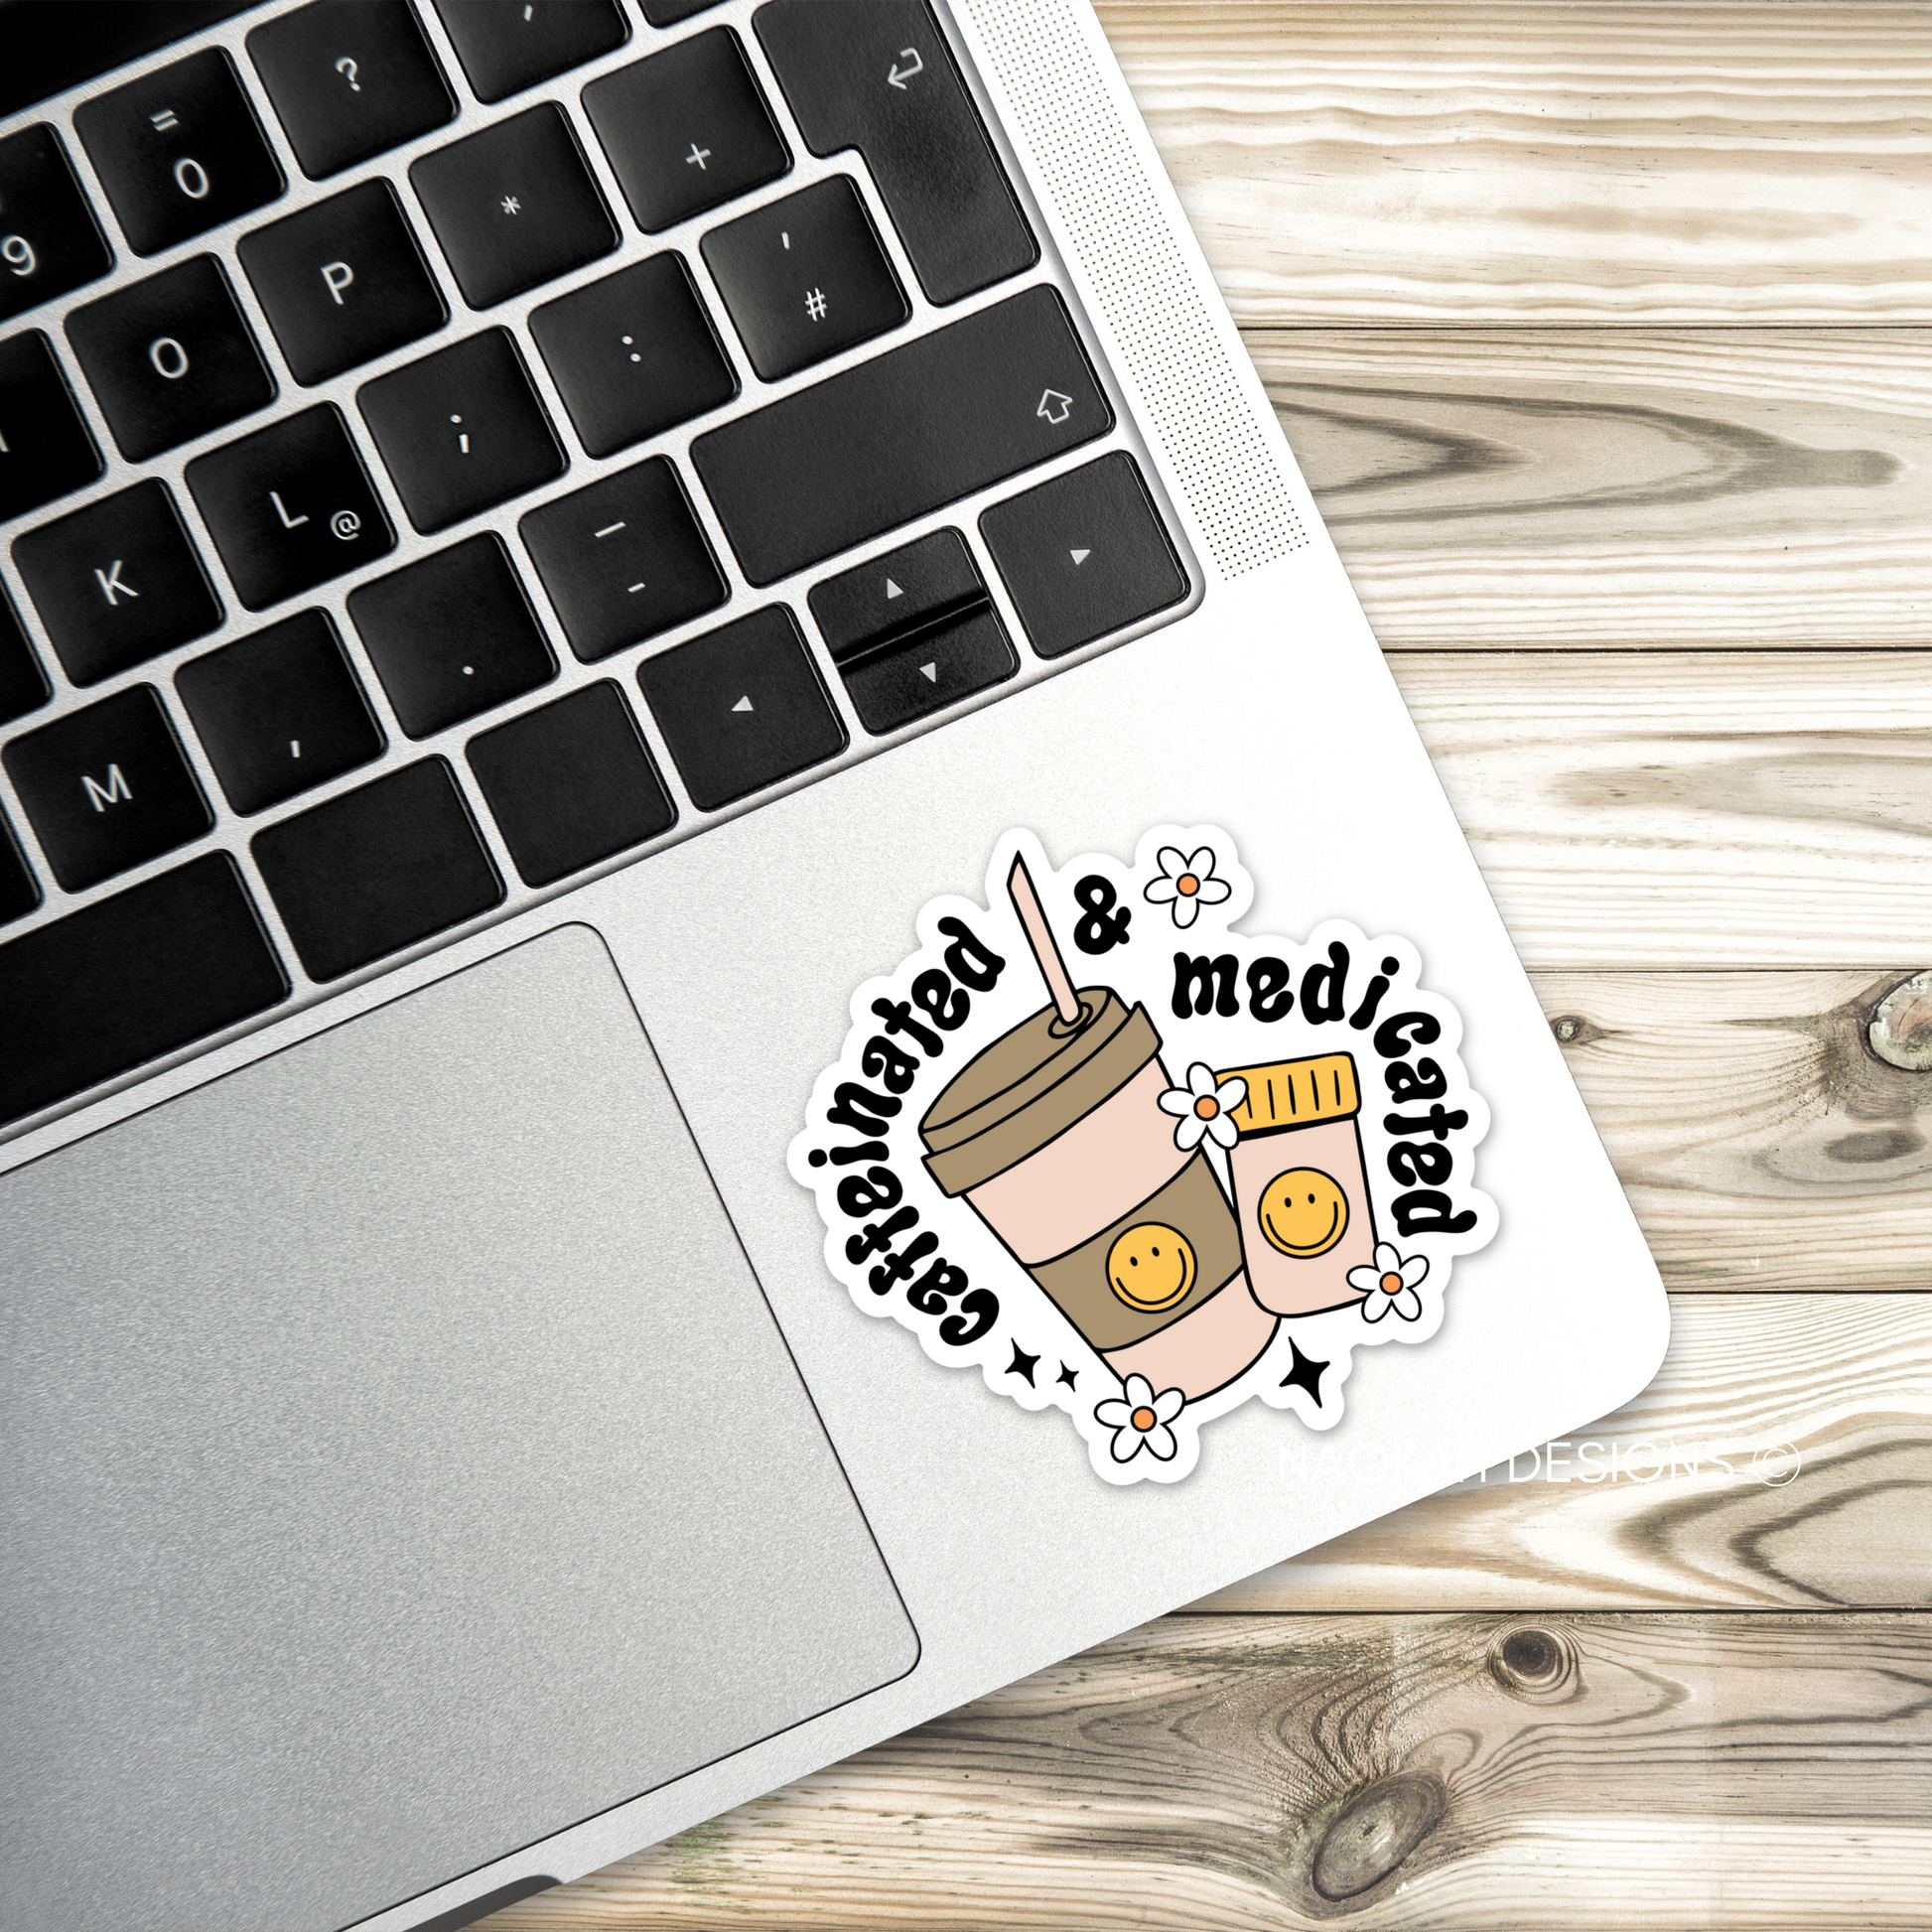 Caffeinated and Medicated Sticker, Cute Mental Health Sticker, Mental Health Sticker, Coffee Lover Sticker, Trendy Sticker, Cute Sticker